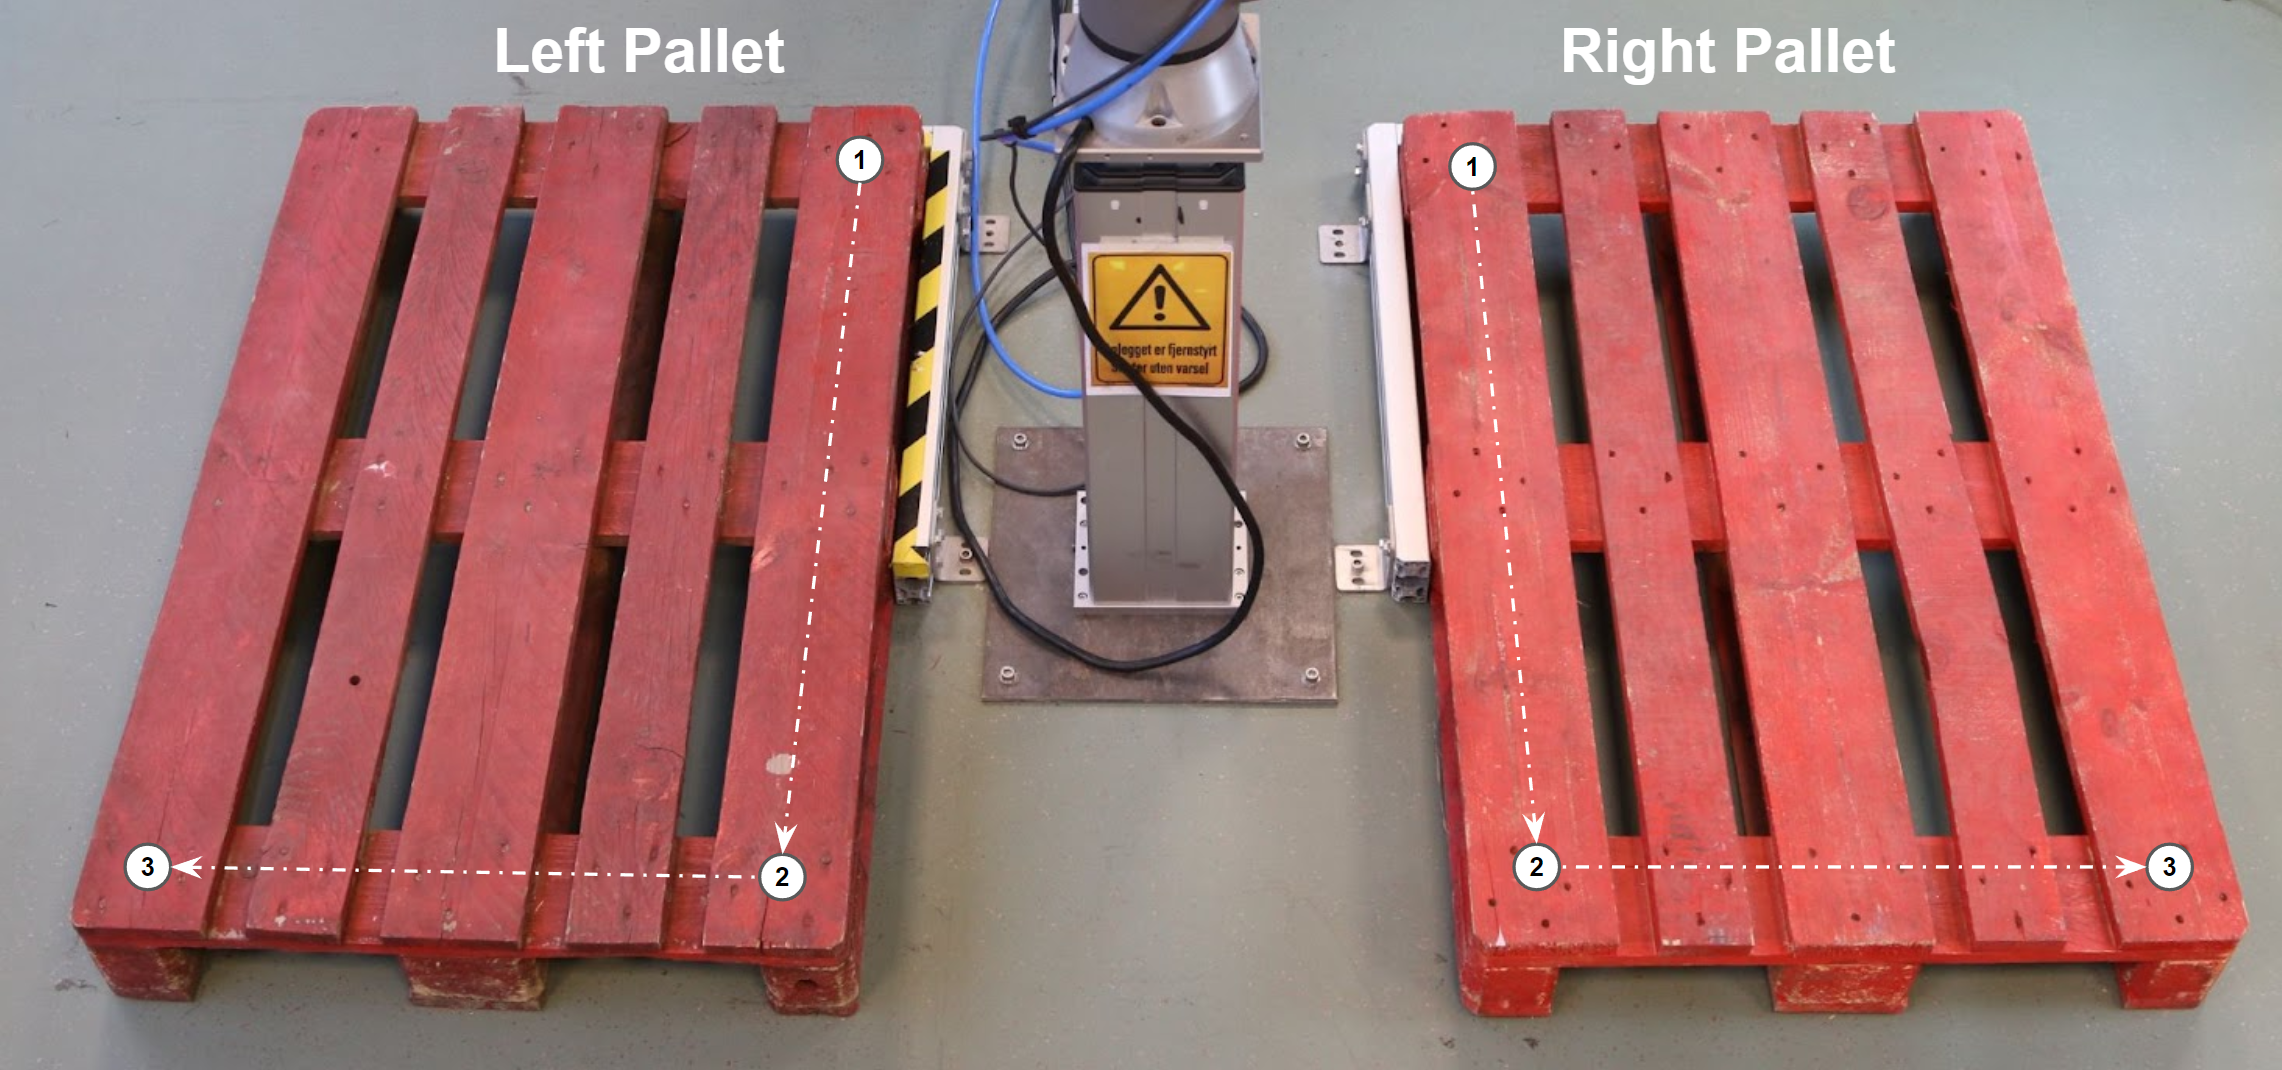 Recommended Pallet calibration points